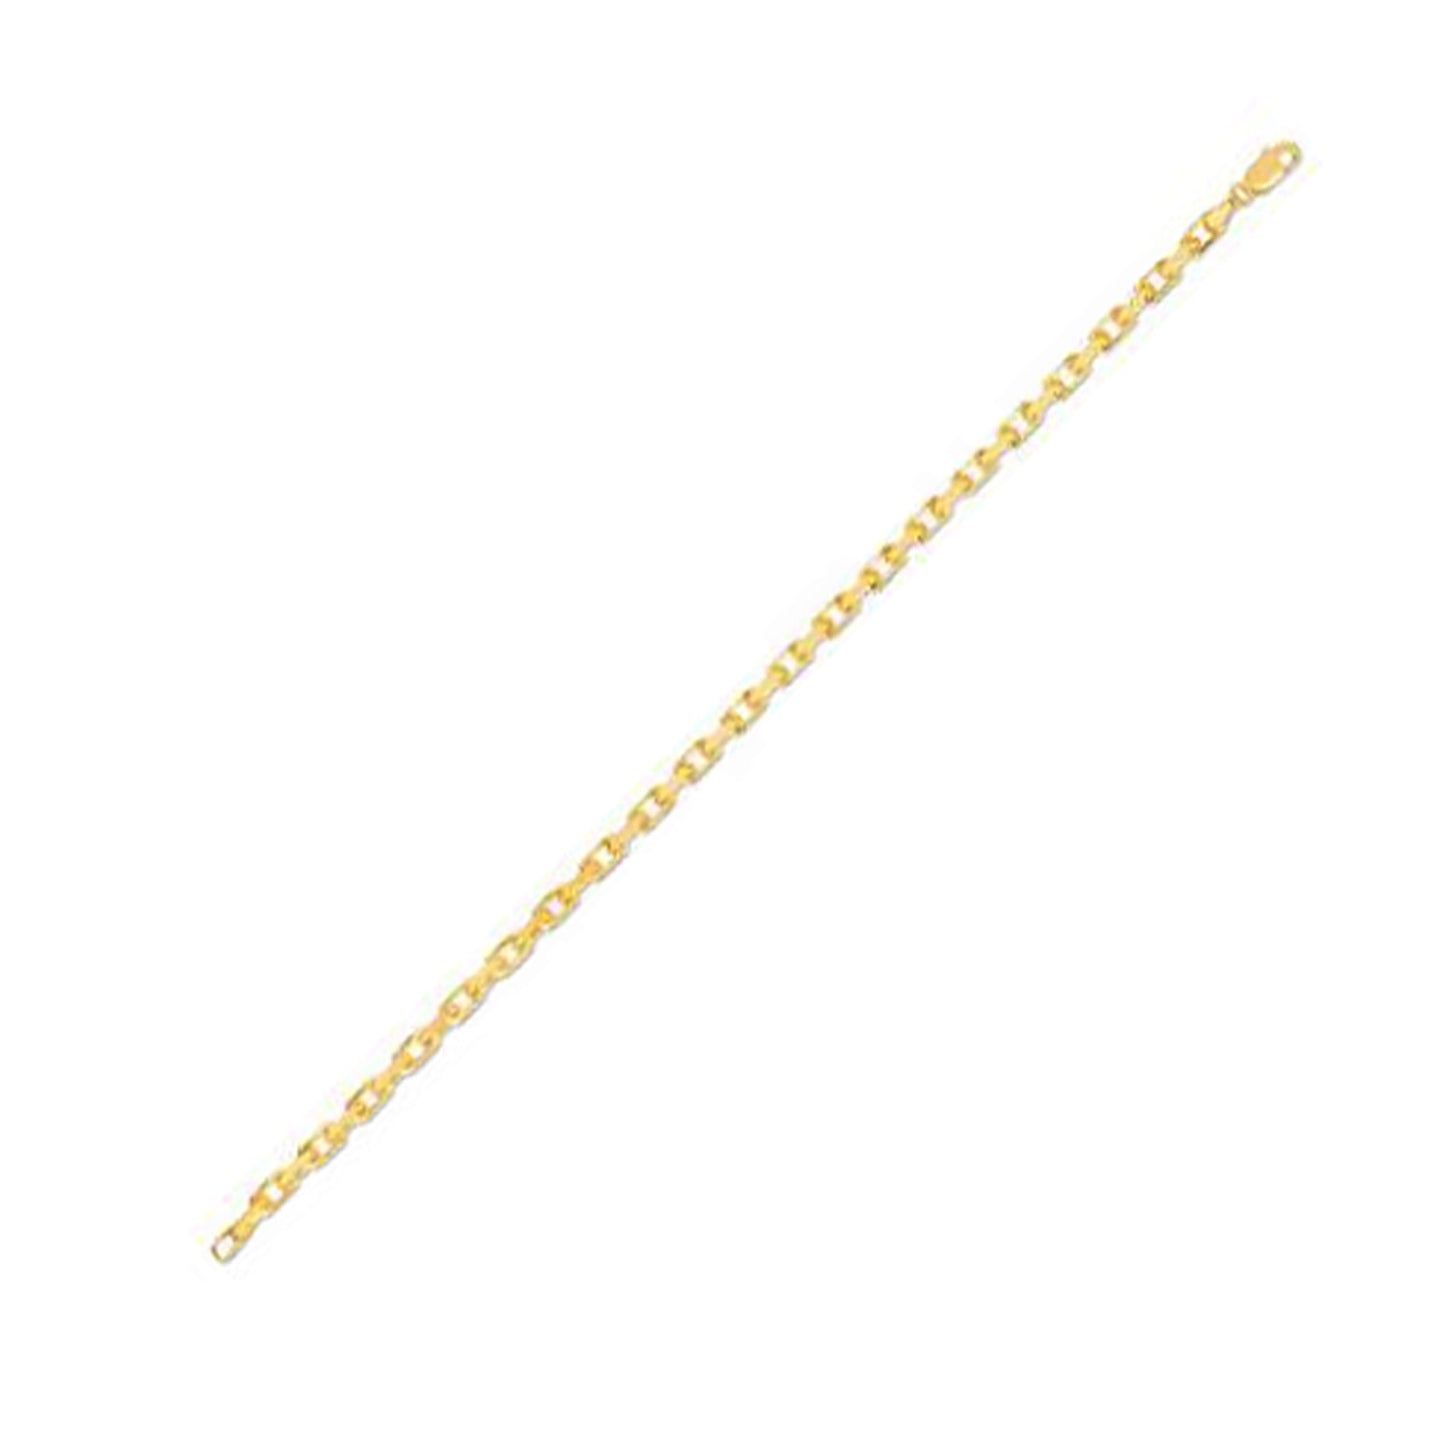 3.6mm 14k Yellow Gold French Cable Chain Bracelet